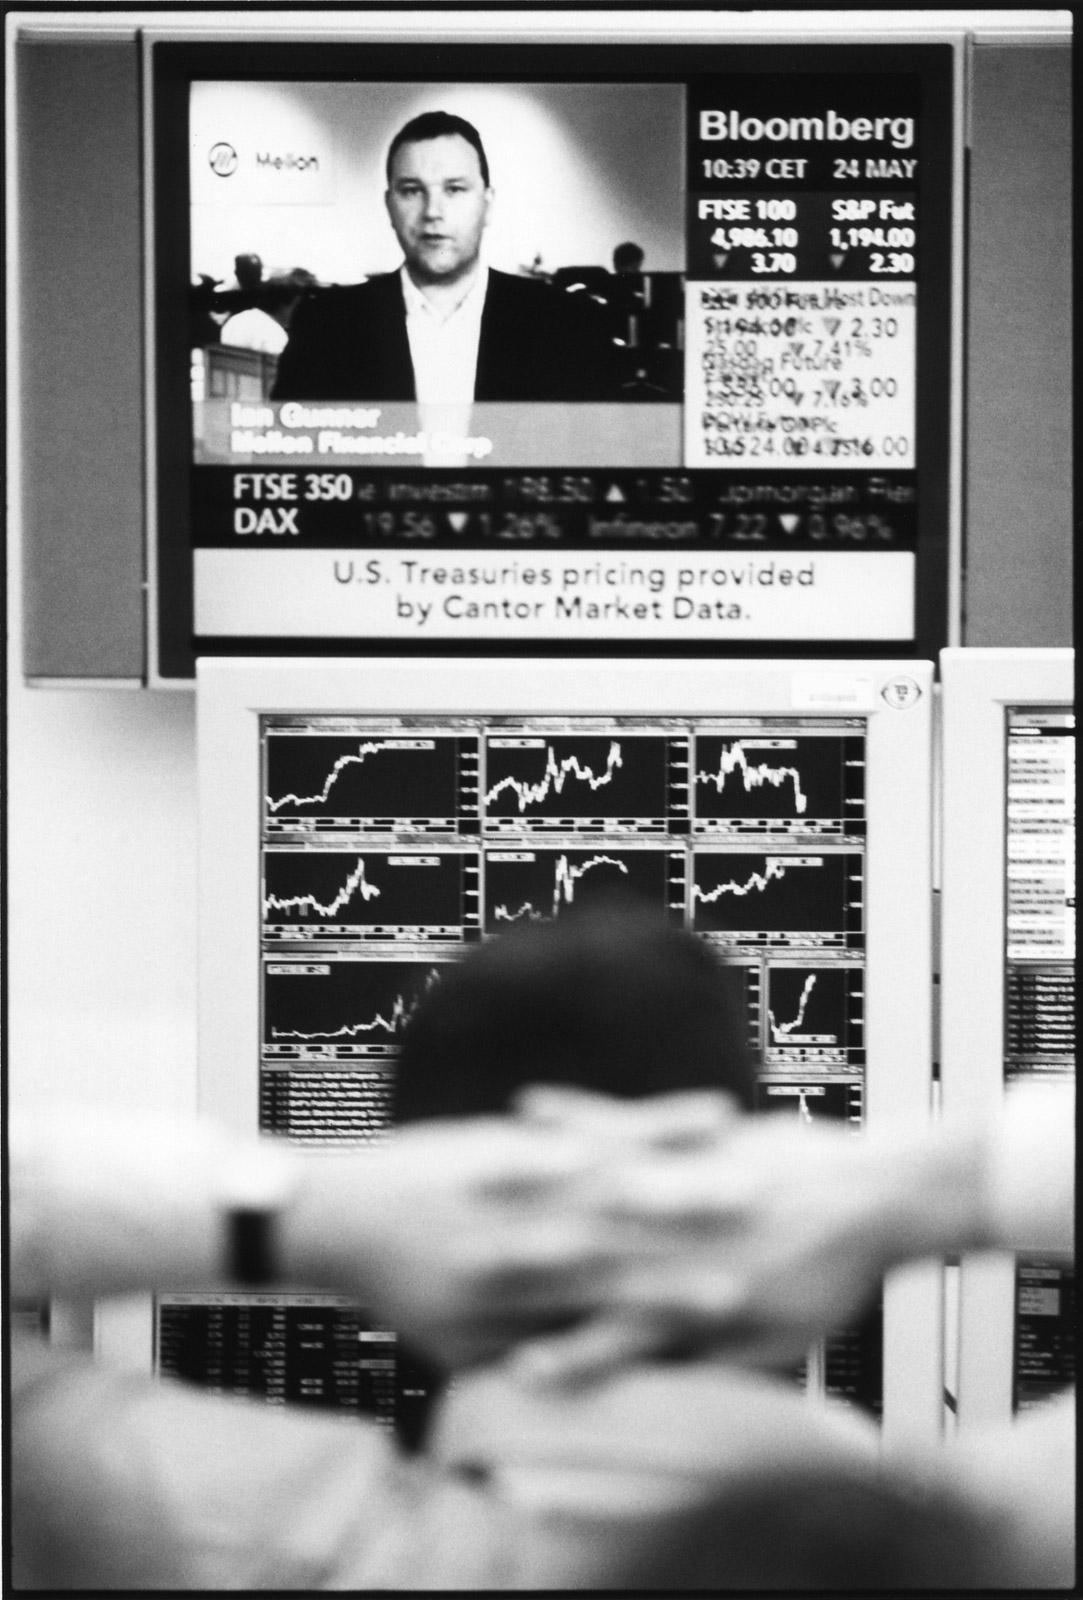 Trader in front of its bloomberg screen, London, 2005